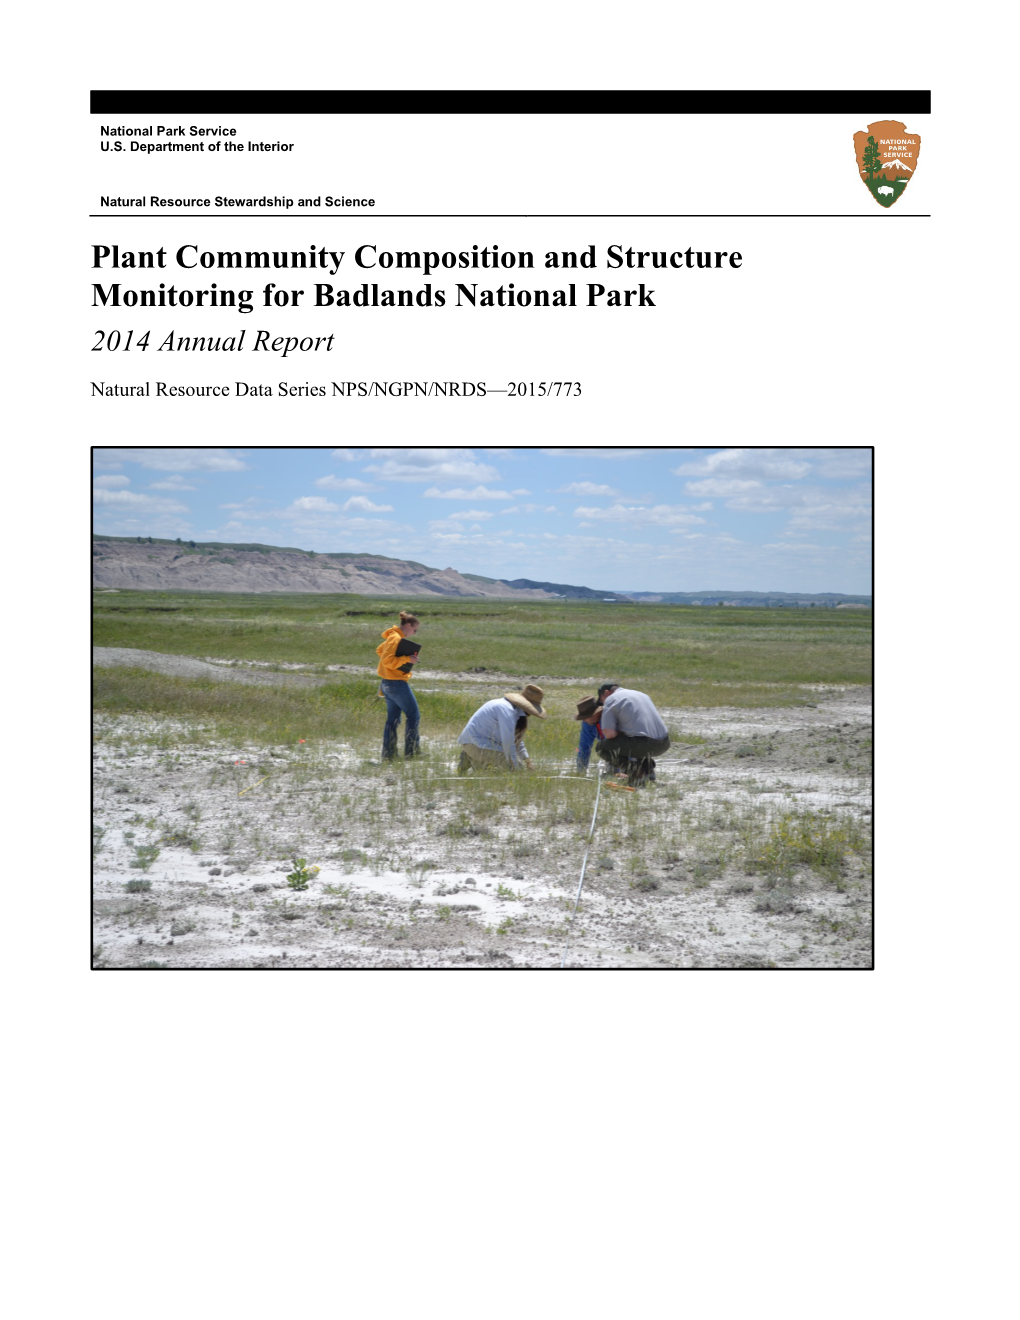 Plant Community Composition and Structure Monitoring for Badlands National Park 2014 Annual Report